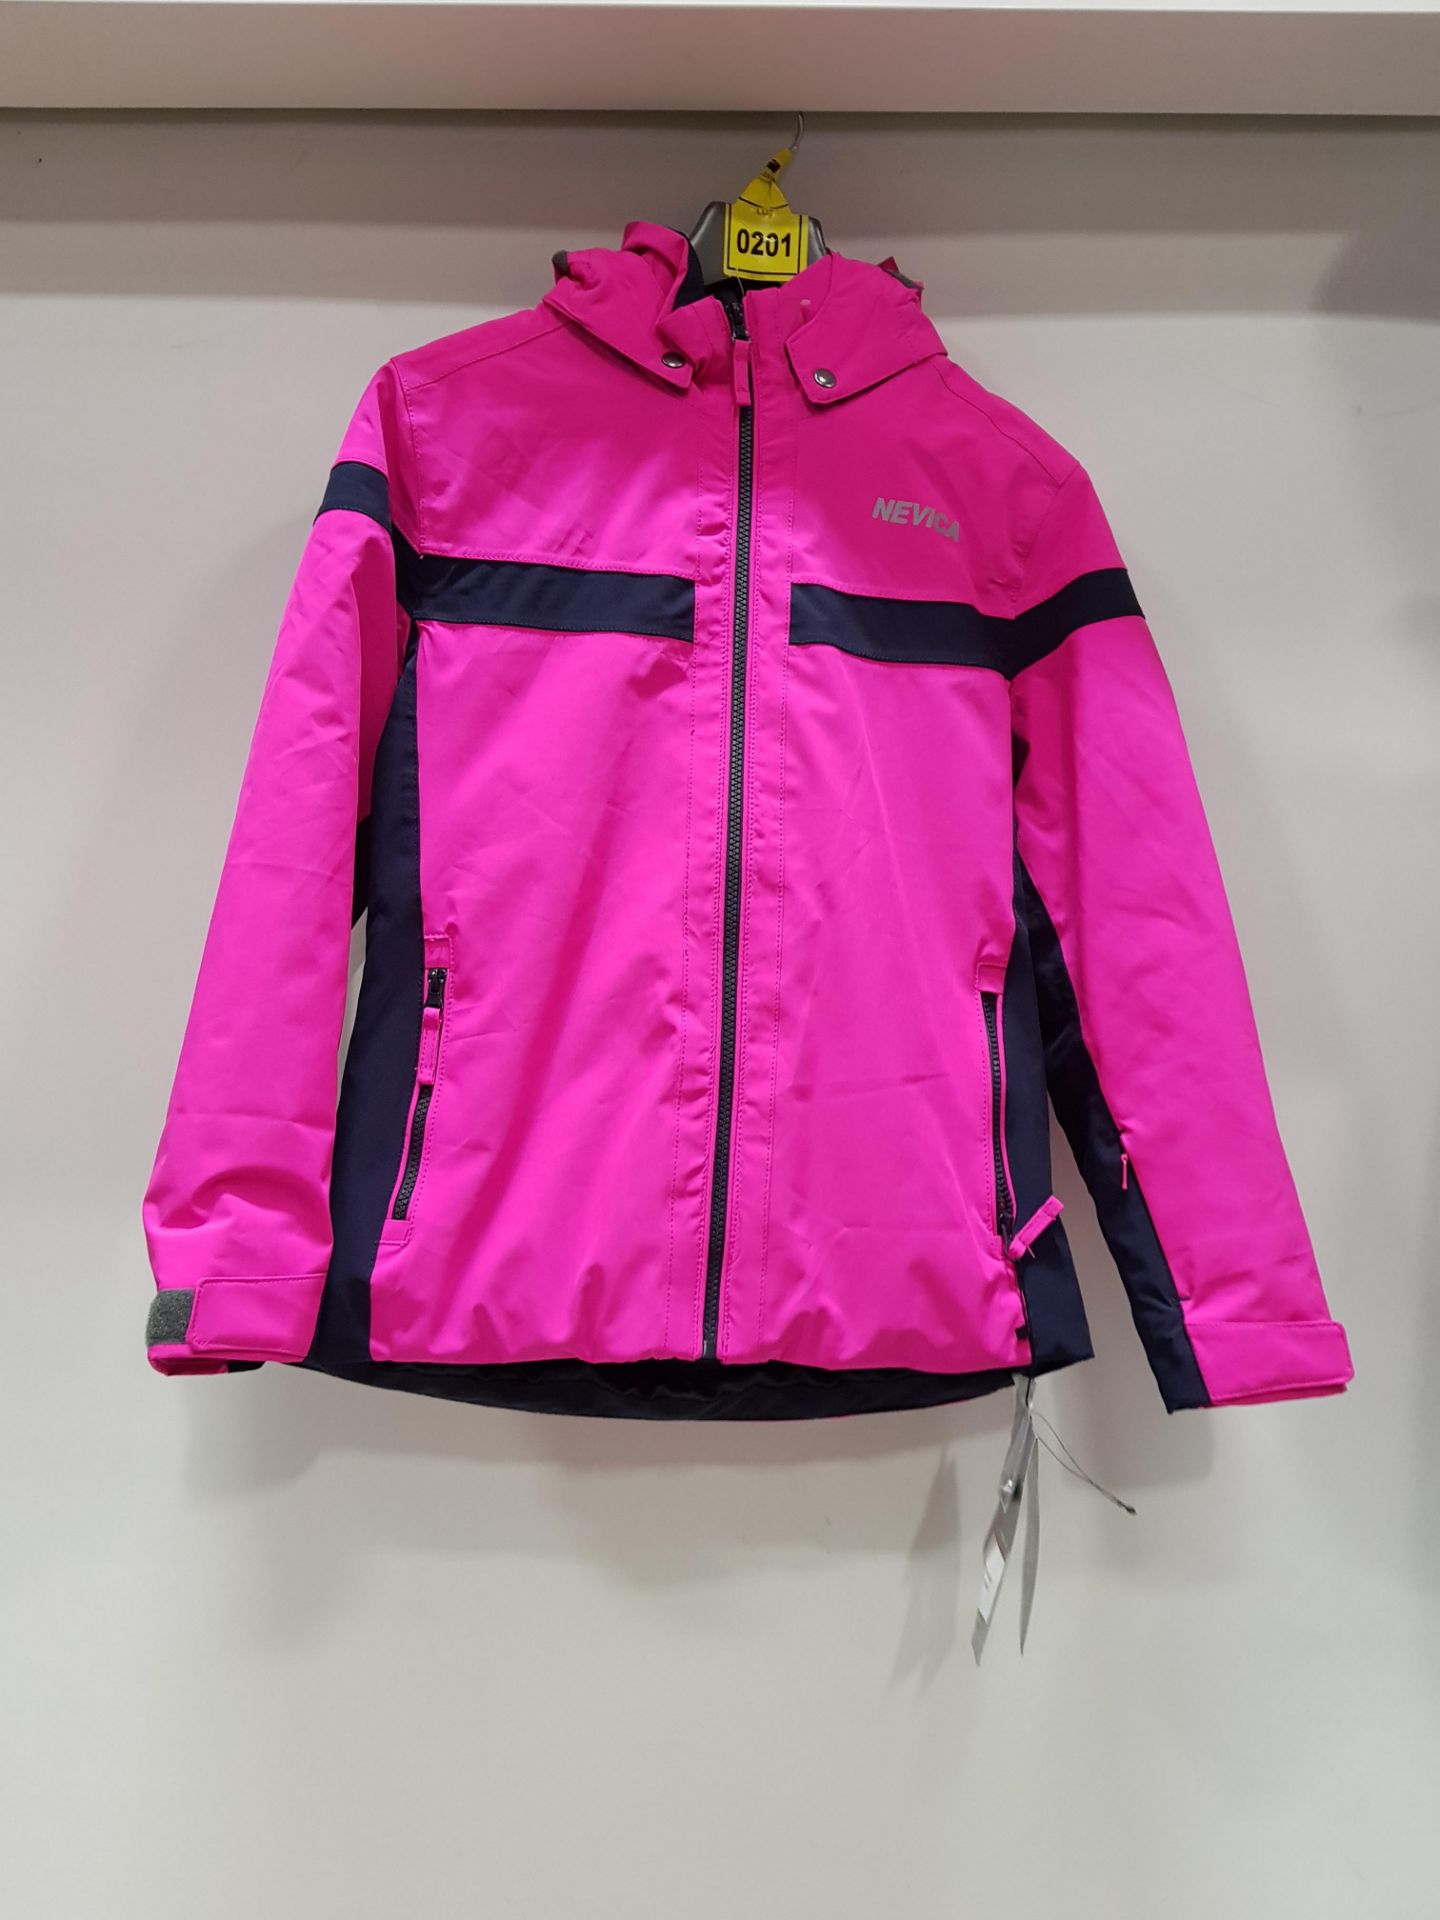 BRAND NEW NEVICA SKI JACKET IN PINK AND BLACK ( SIZE UK 13 - 14 YRS )